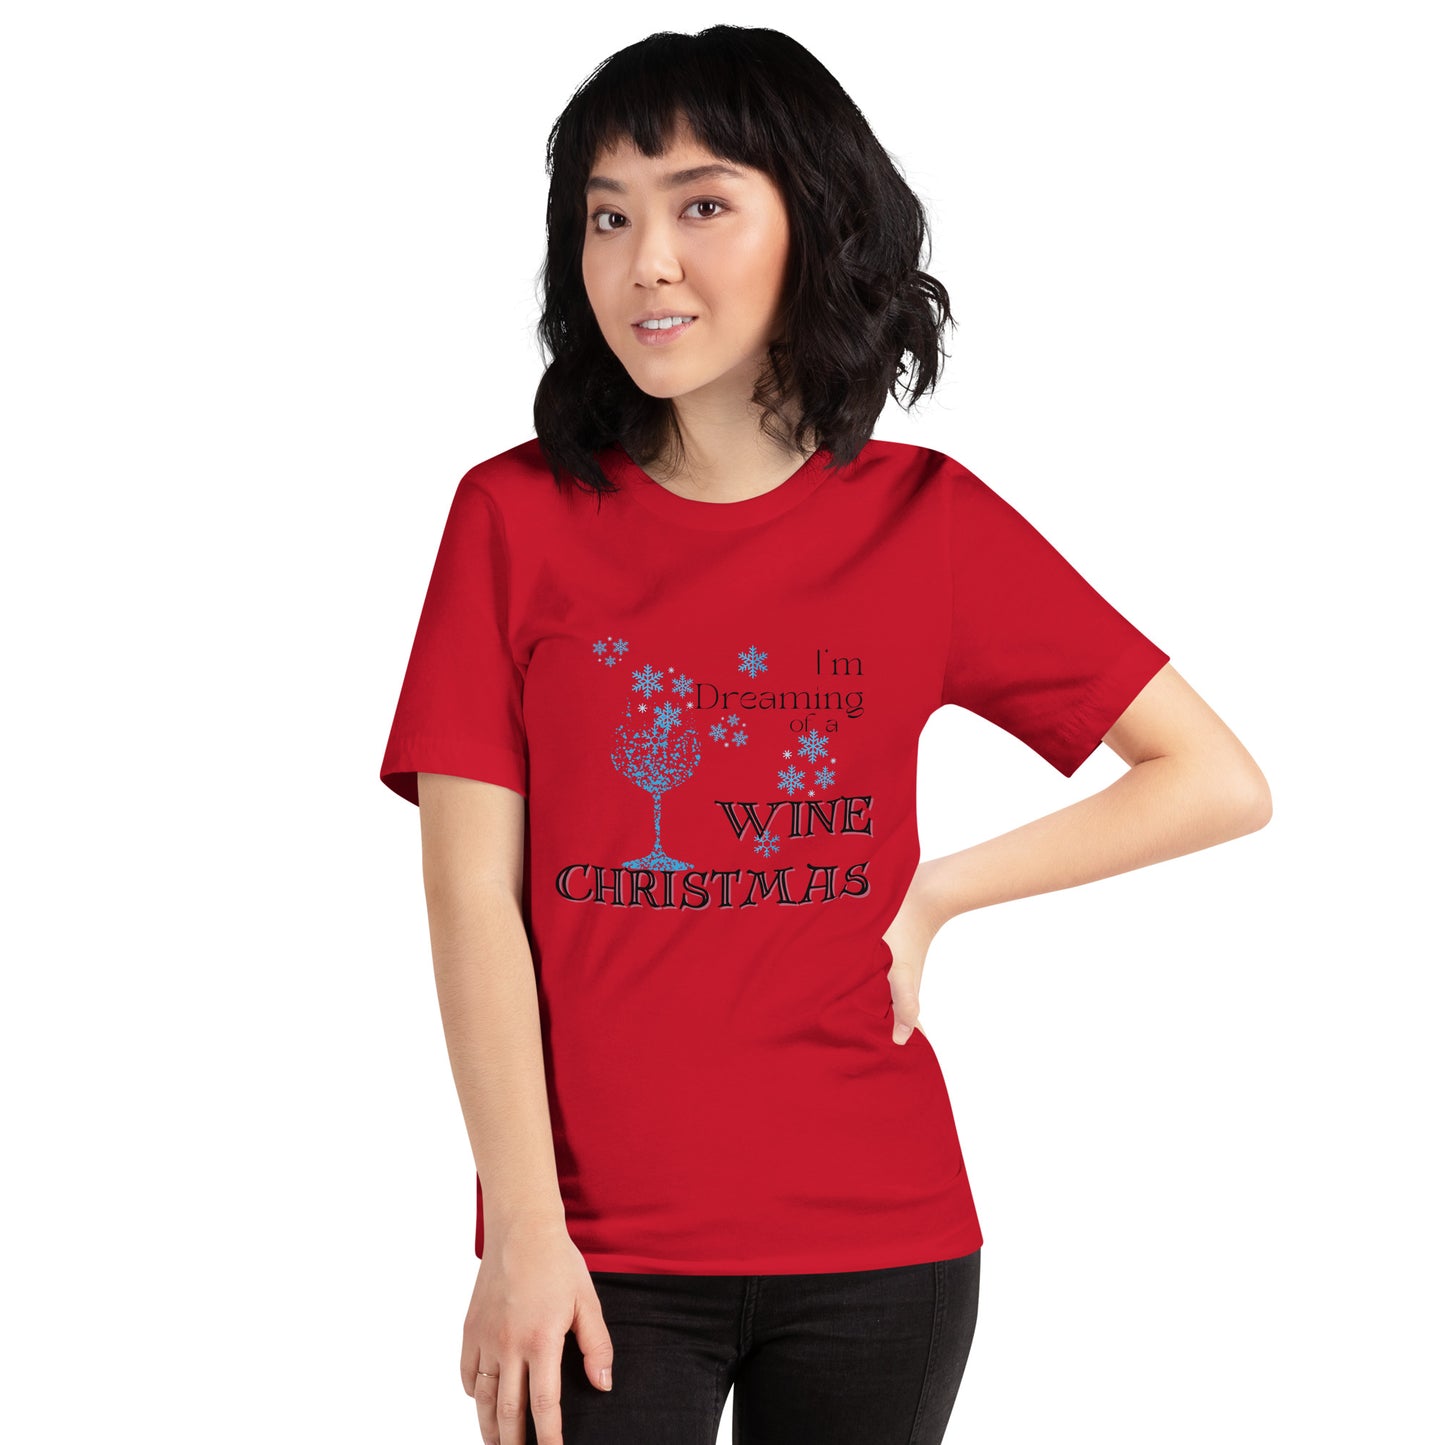 Dreaming of a Wine Christmas t-shirt